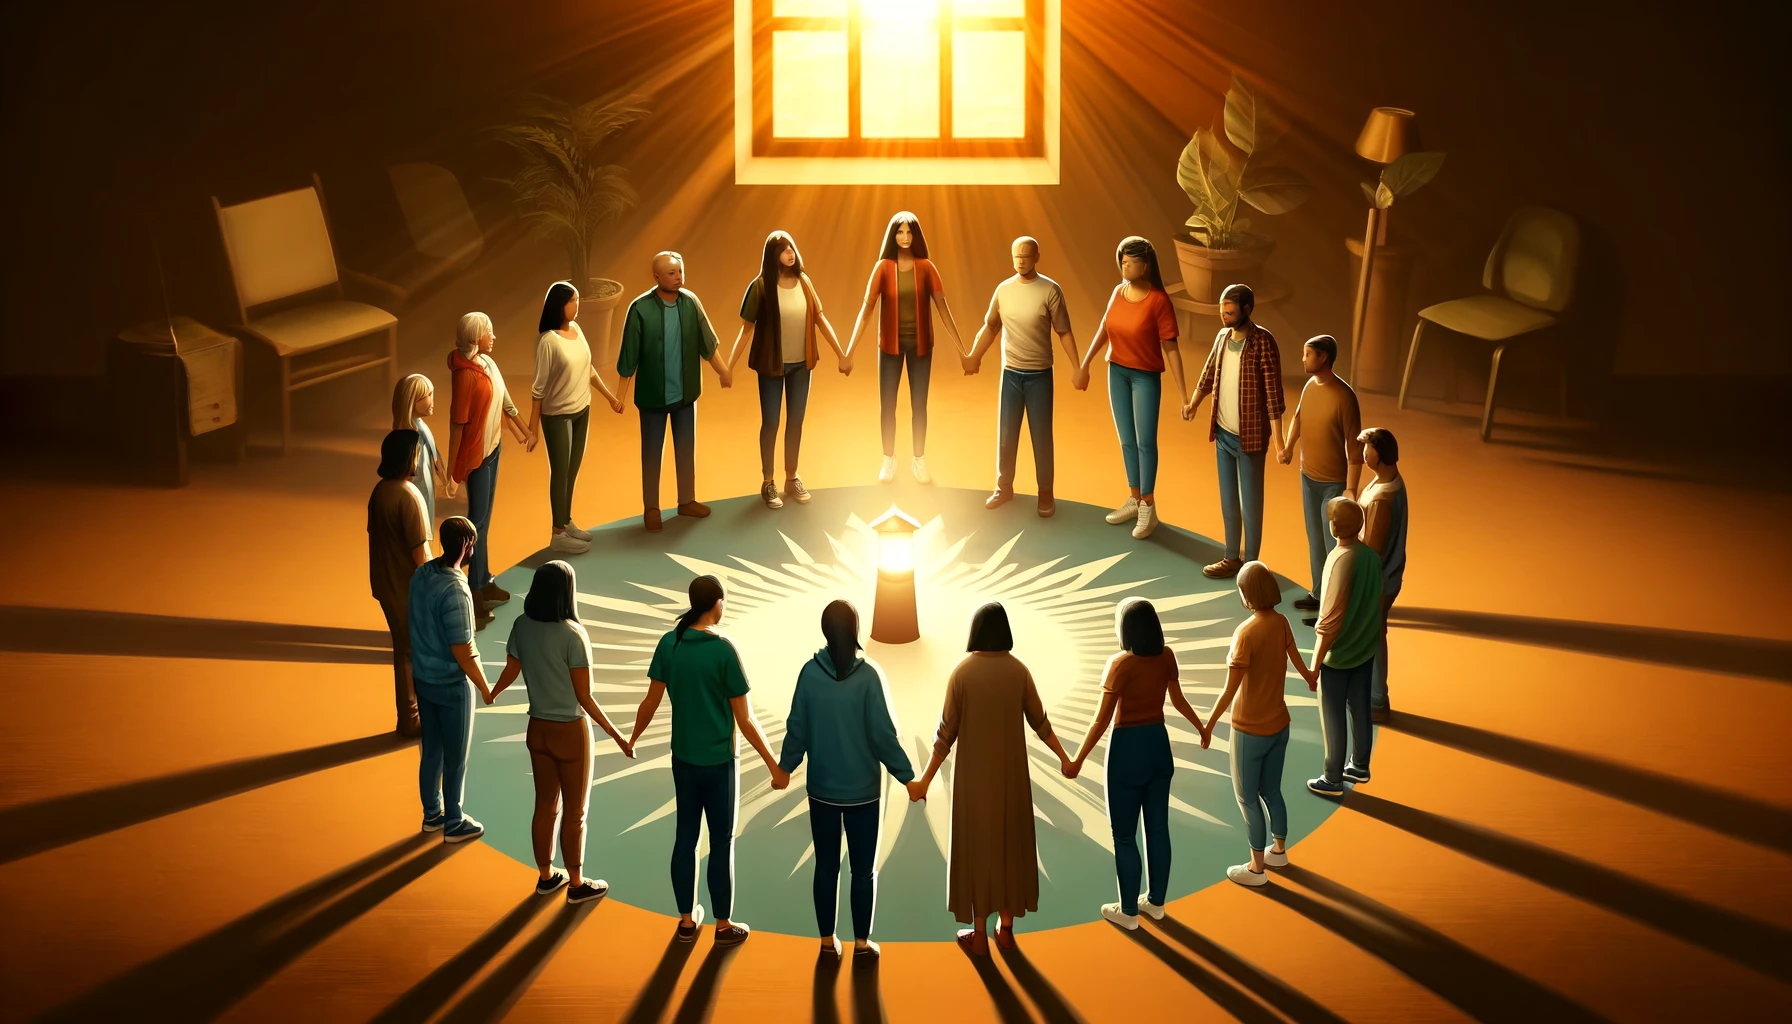 Illustrate the concept of community support in Narcotics Anonymous. The image should depict a diverse group of people standing in a circle, holding ha